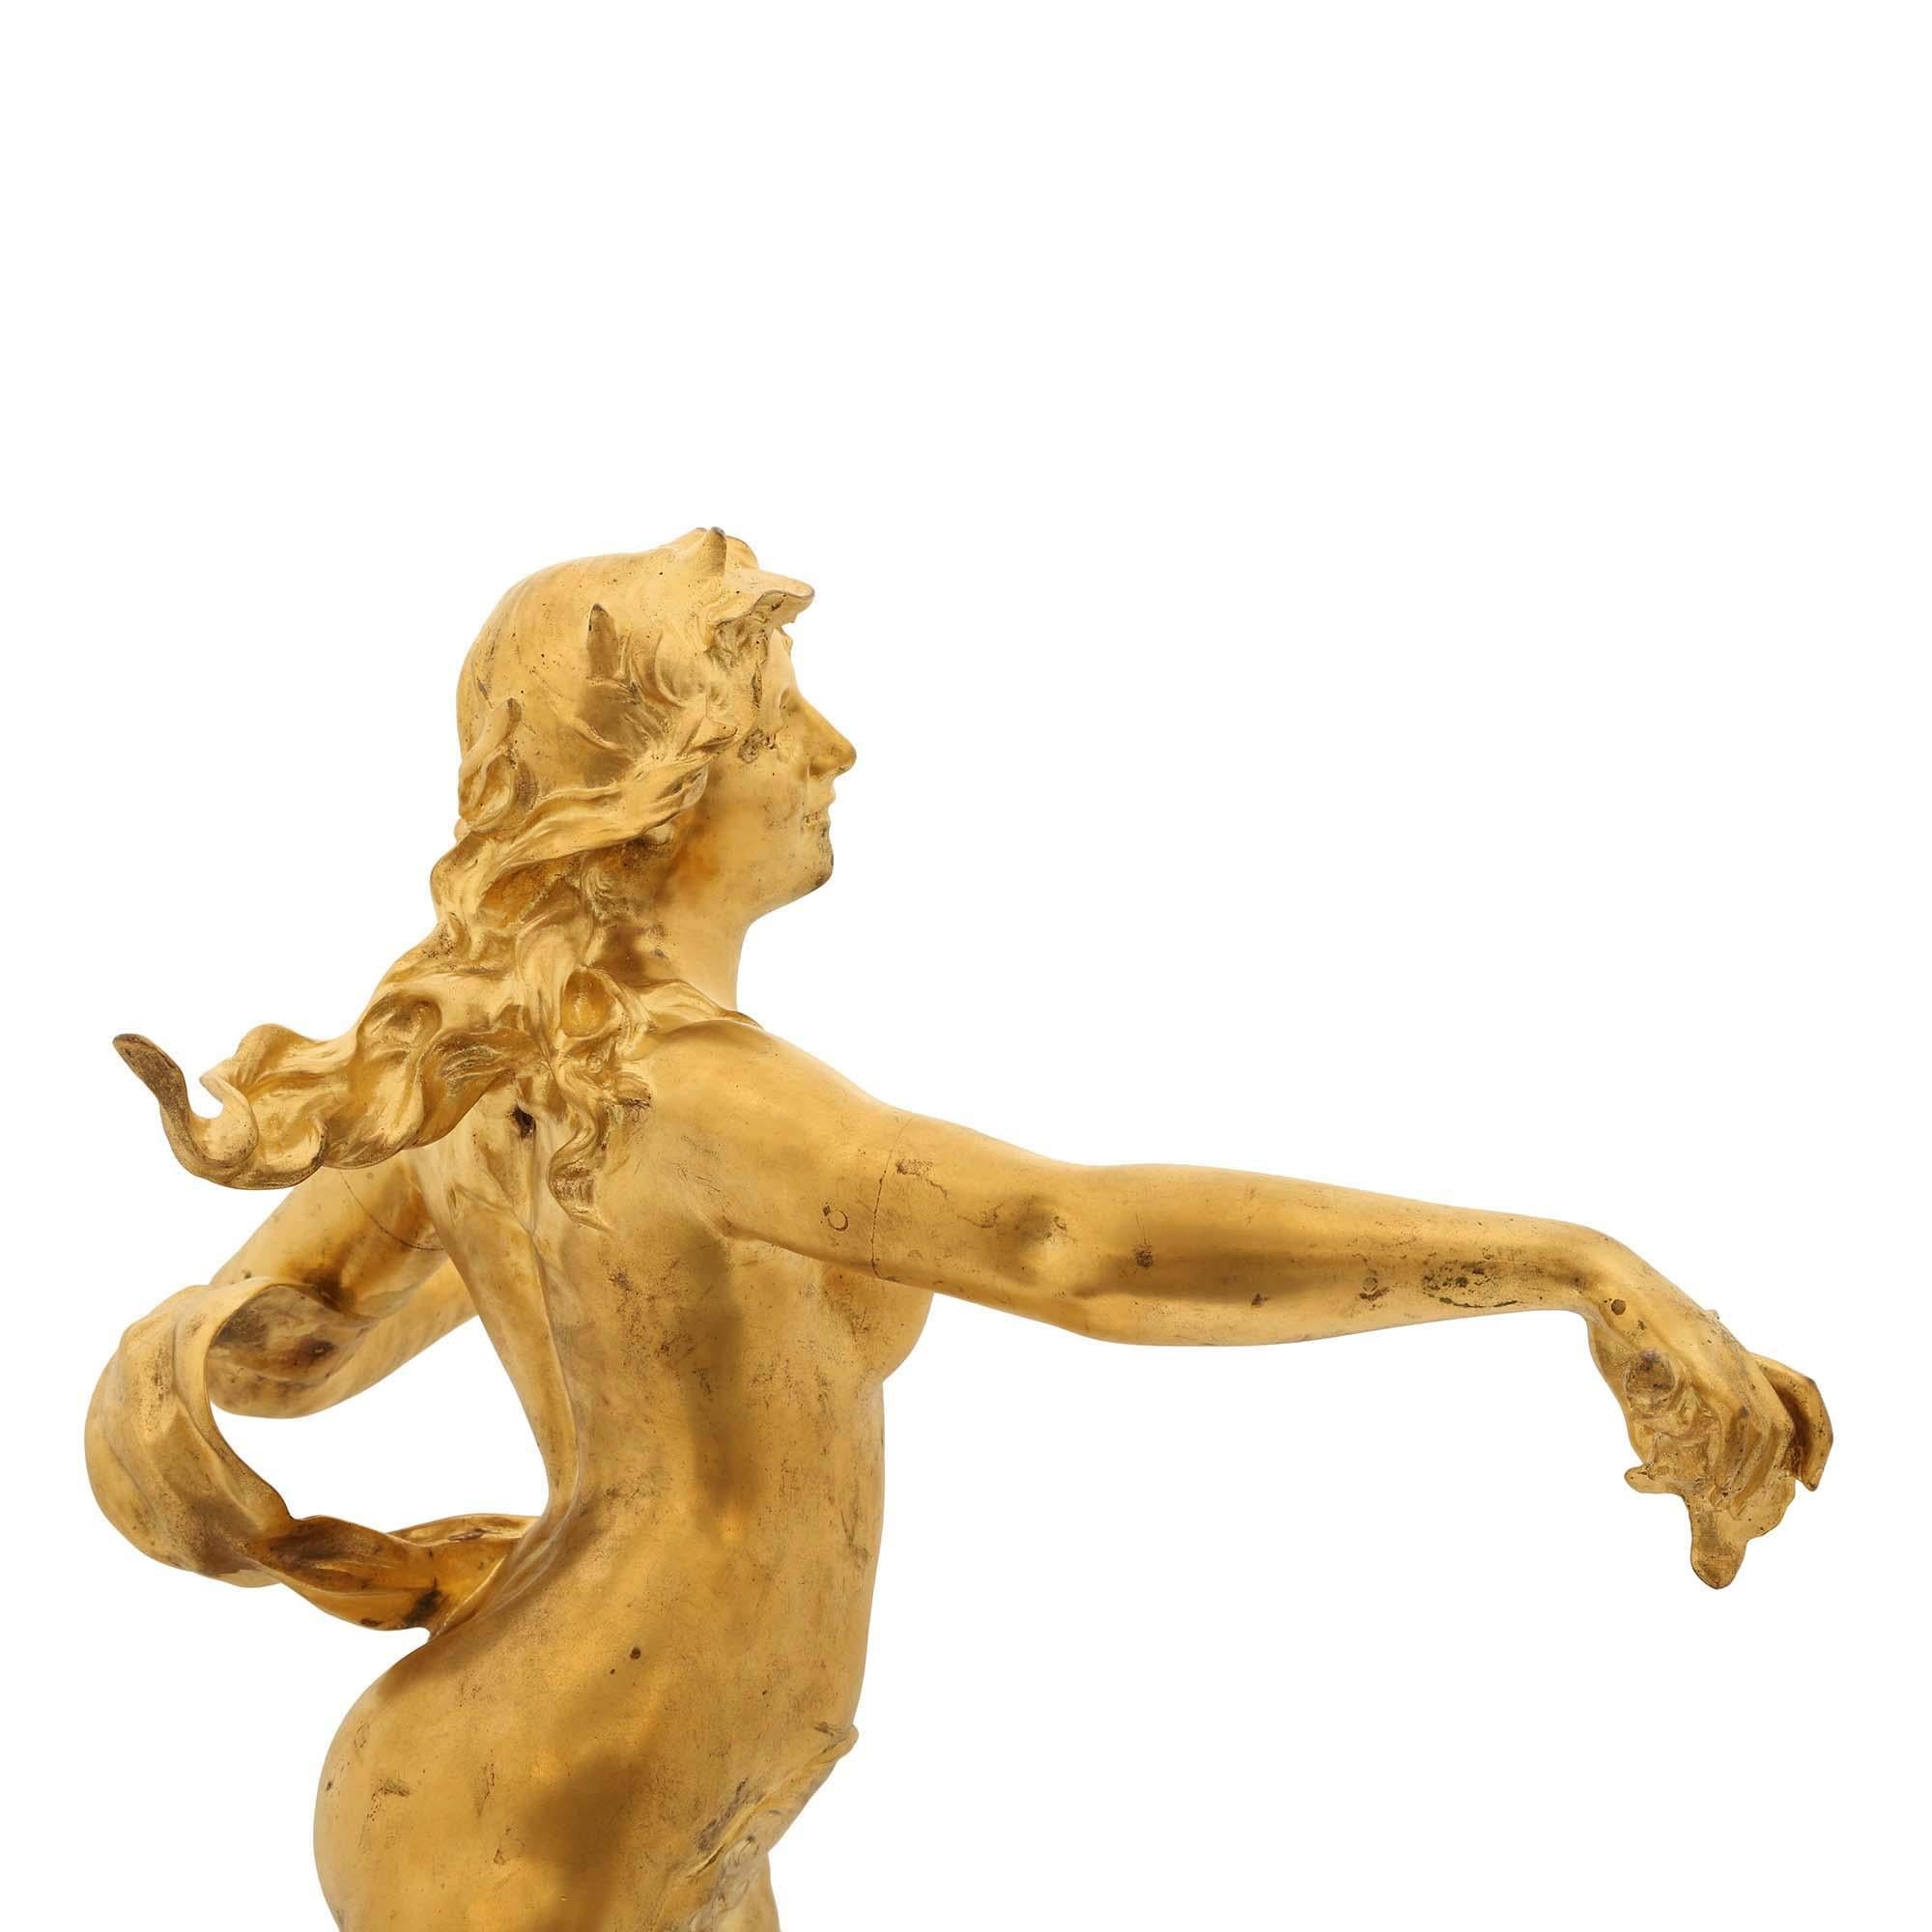  French 19th Century Ormolu Statue of Nereids, Signed Claude-André Férigoule For Sale 5